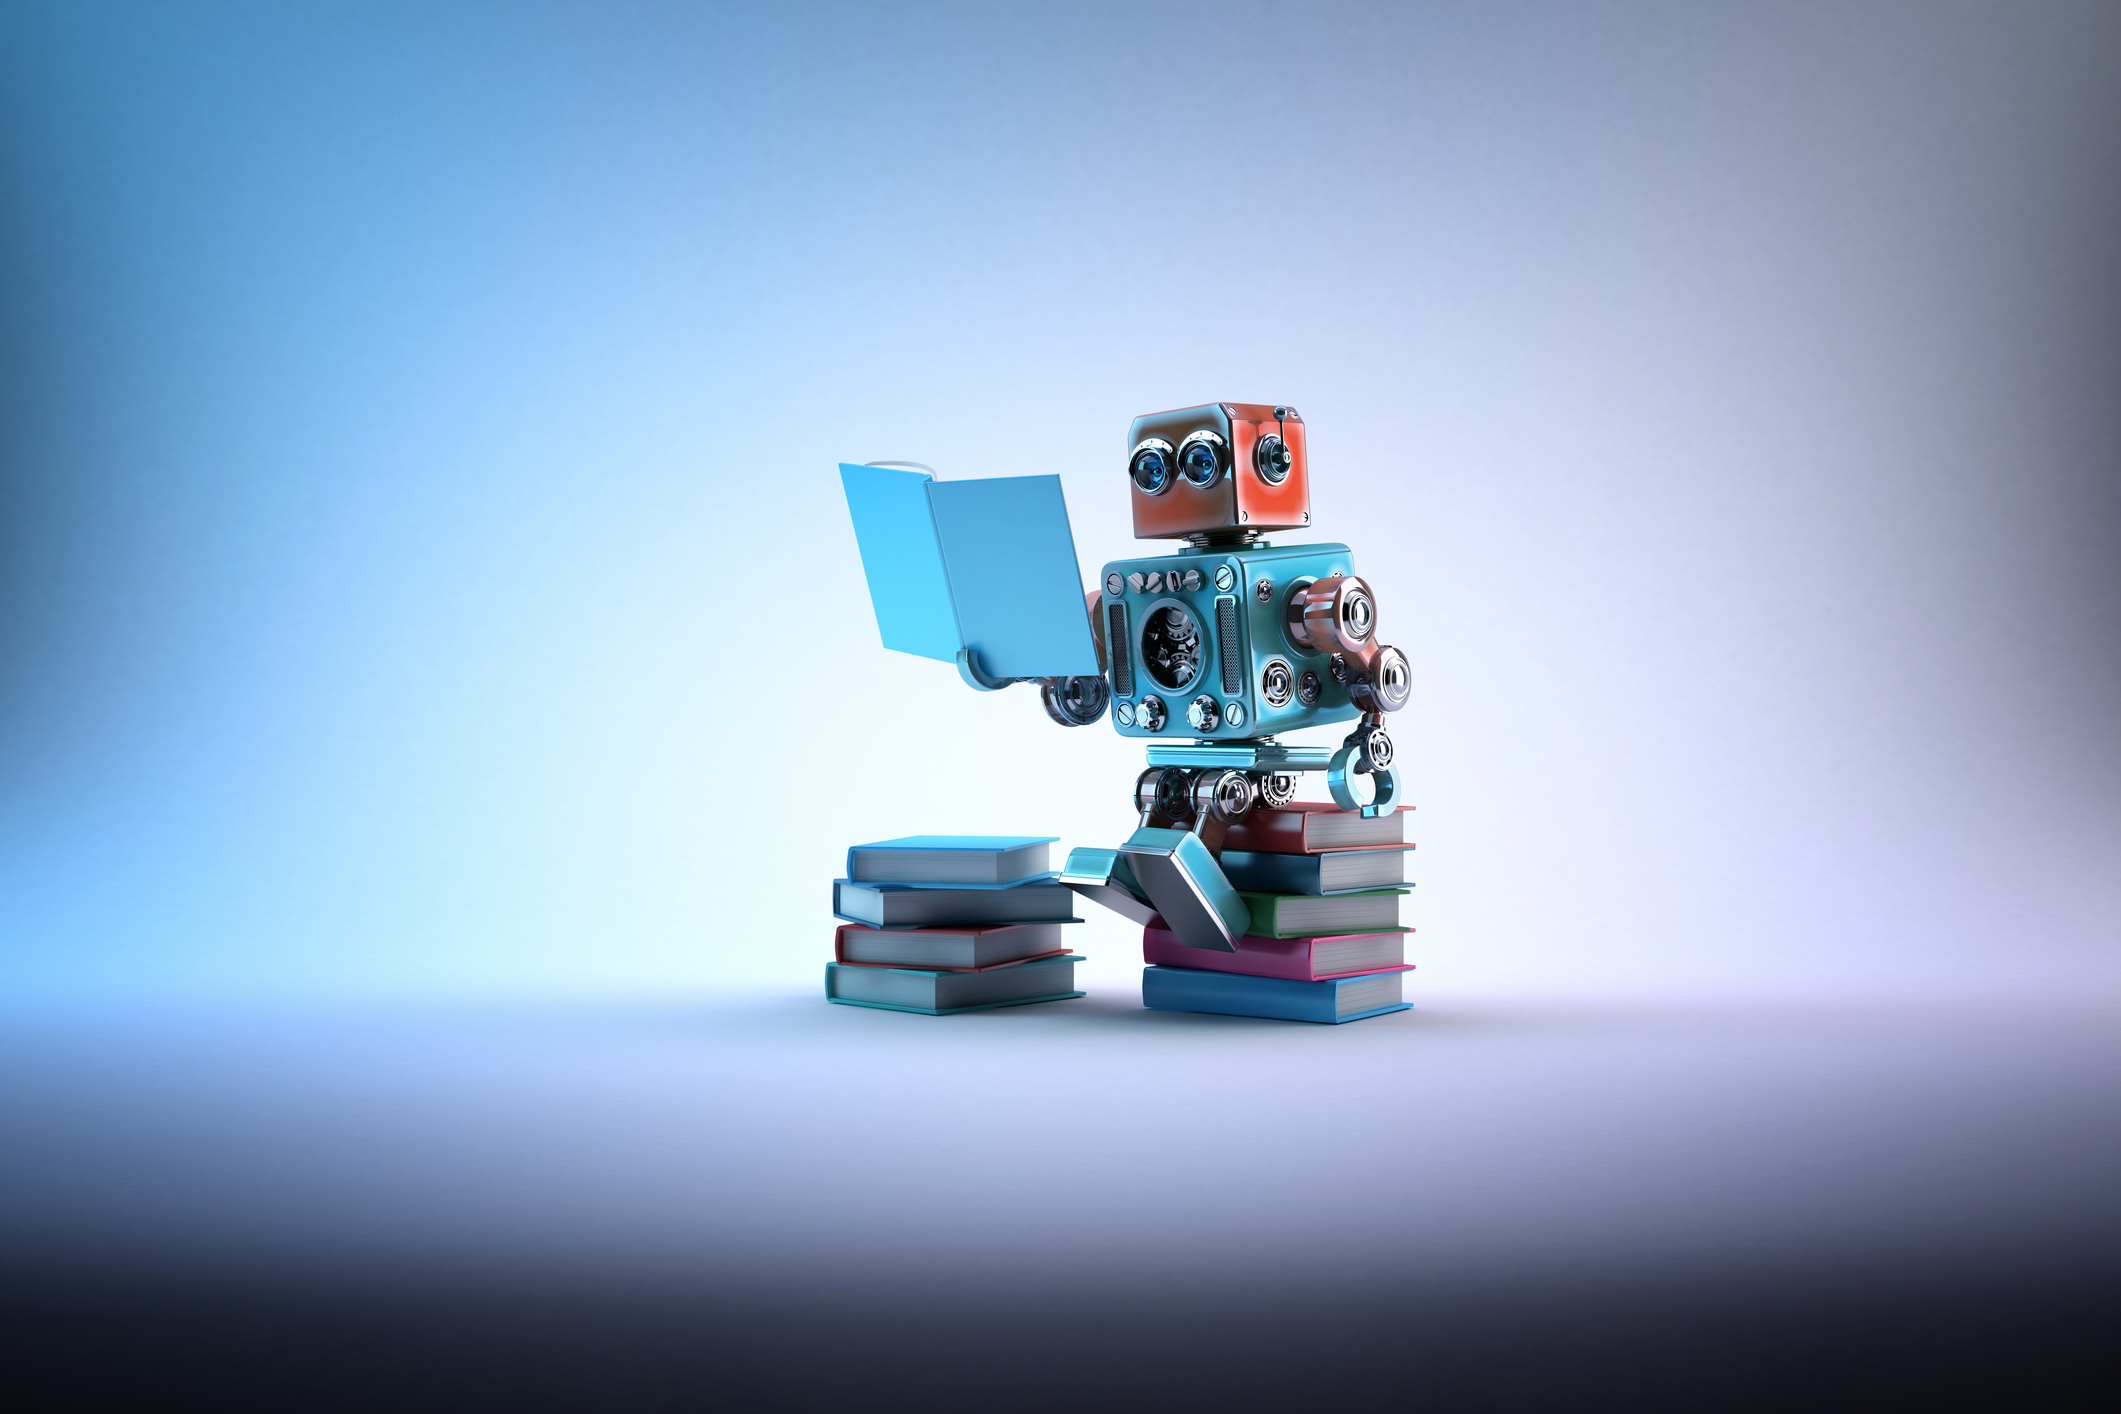 Robot sitting on a stack of books